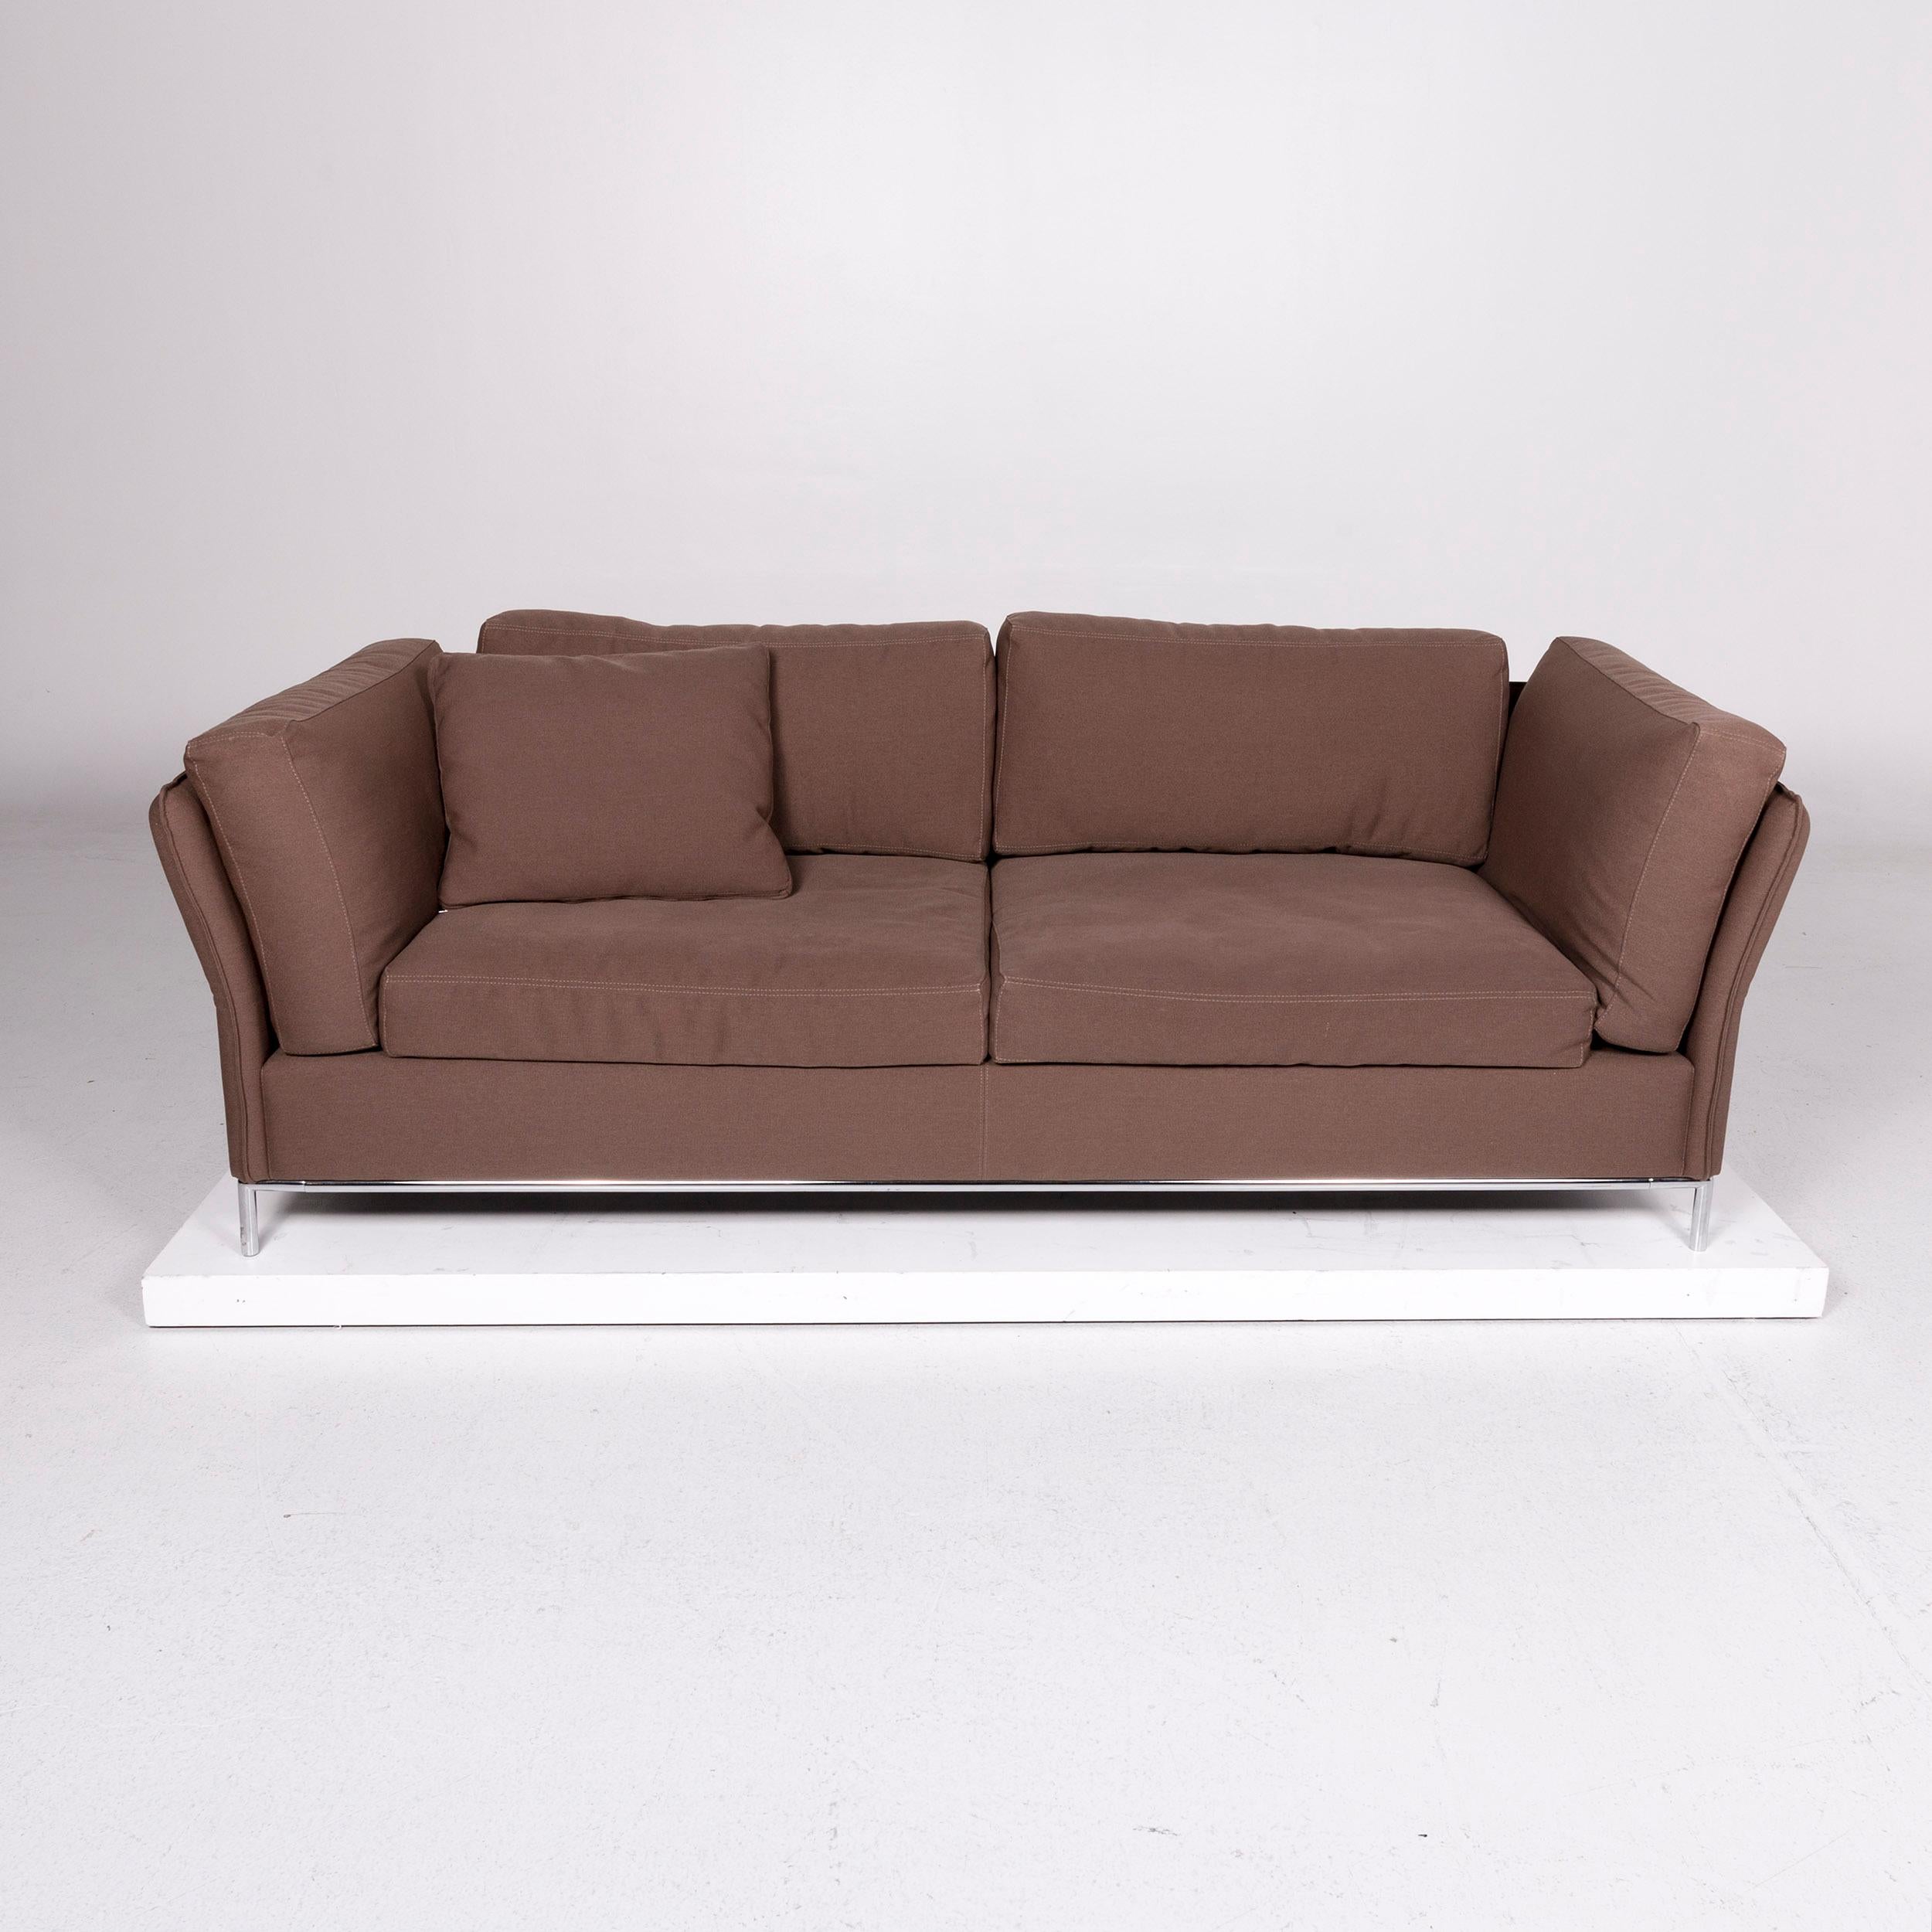 Machalke Loveseat Fabric Sofa Brown Three-Seat Couch In Excellent Condition For Sale In Cologne, DE